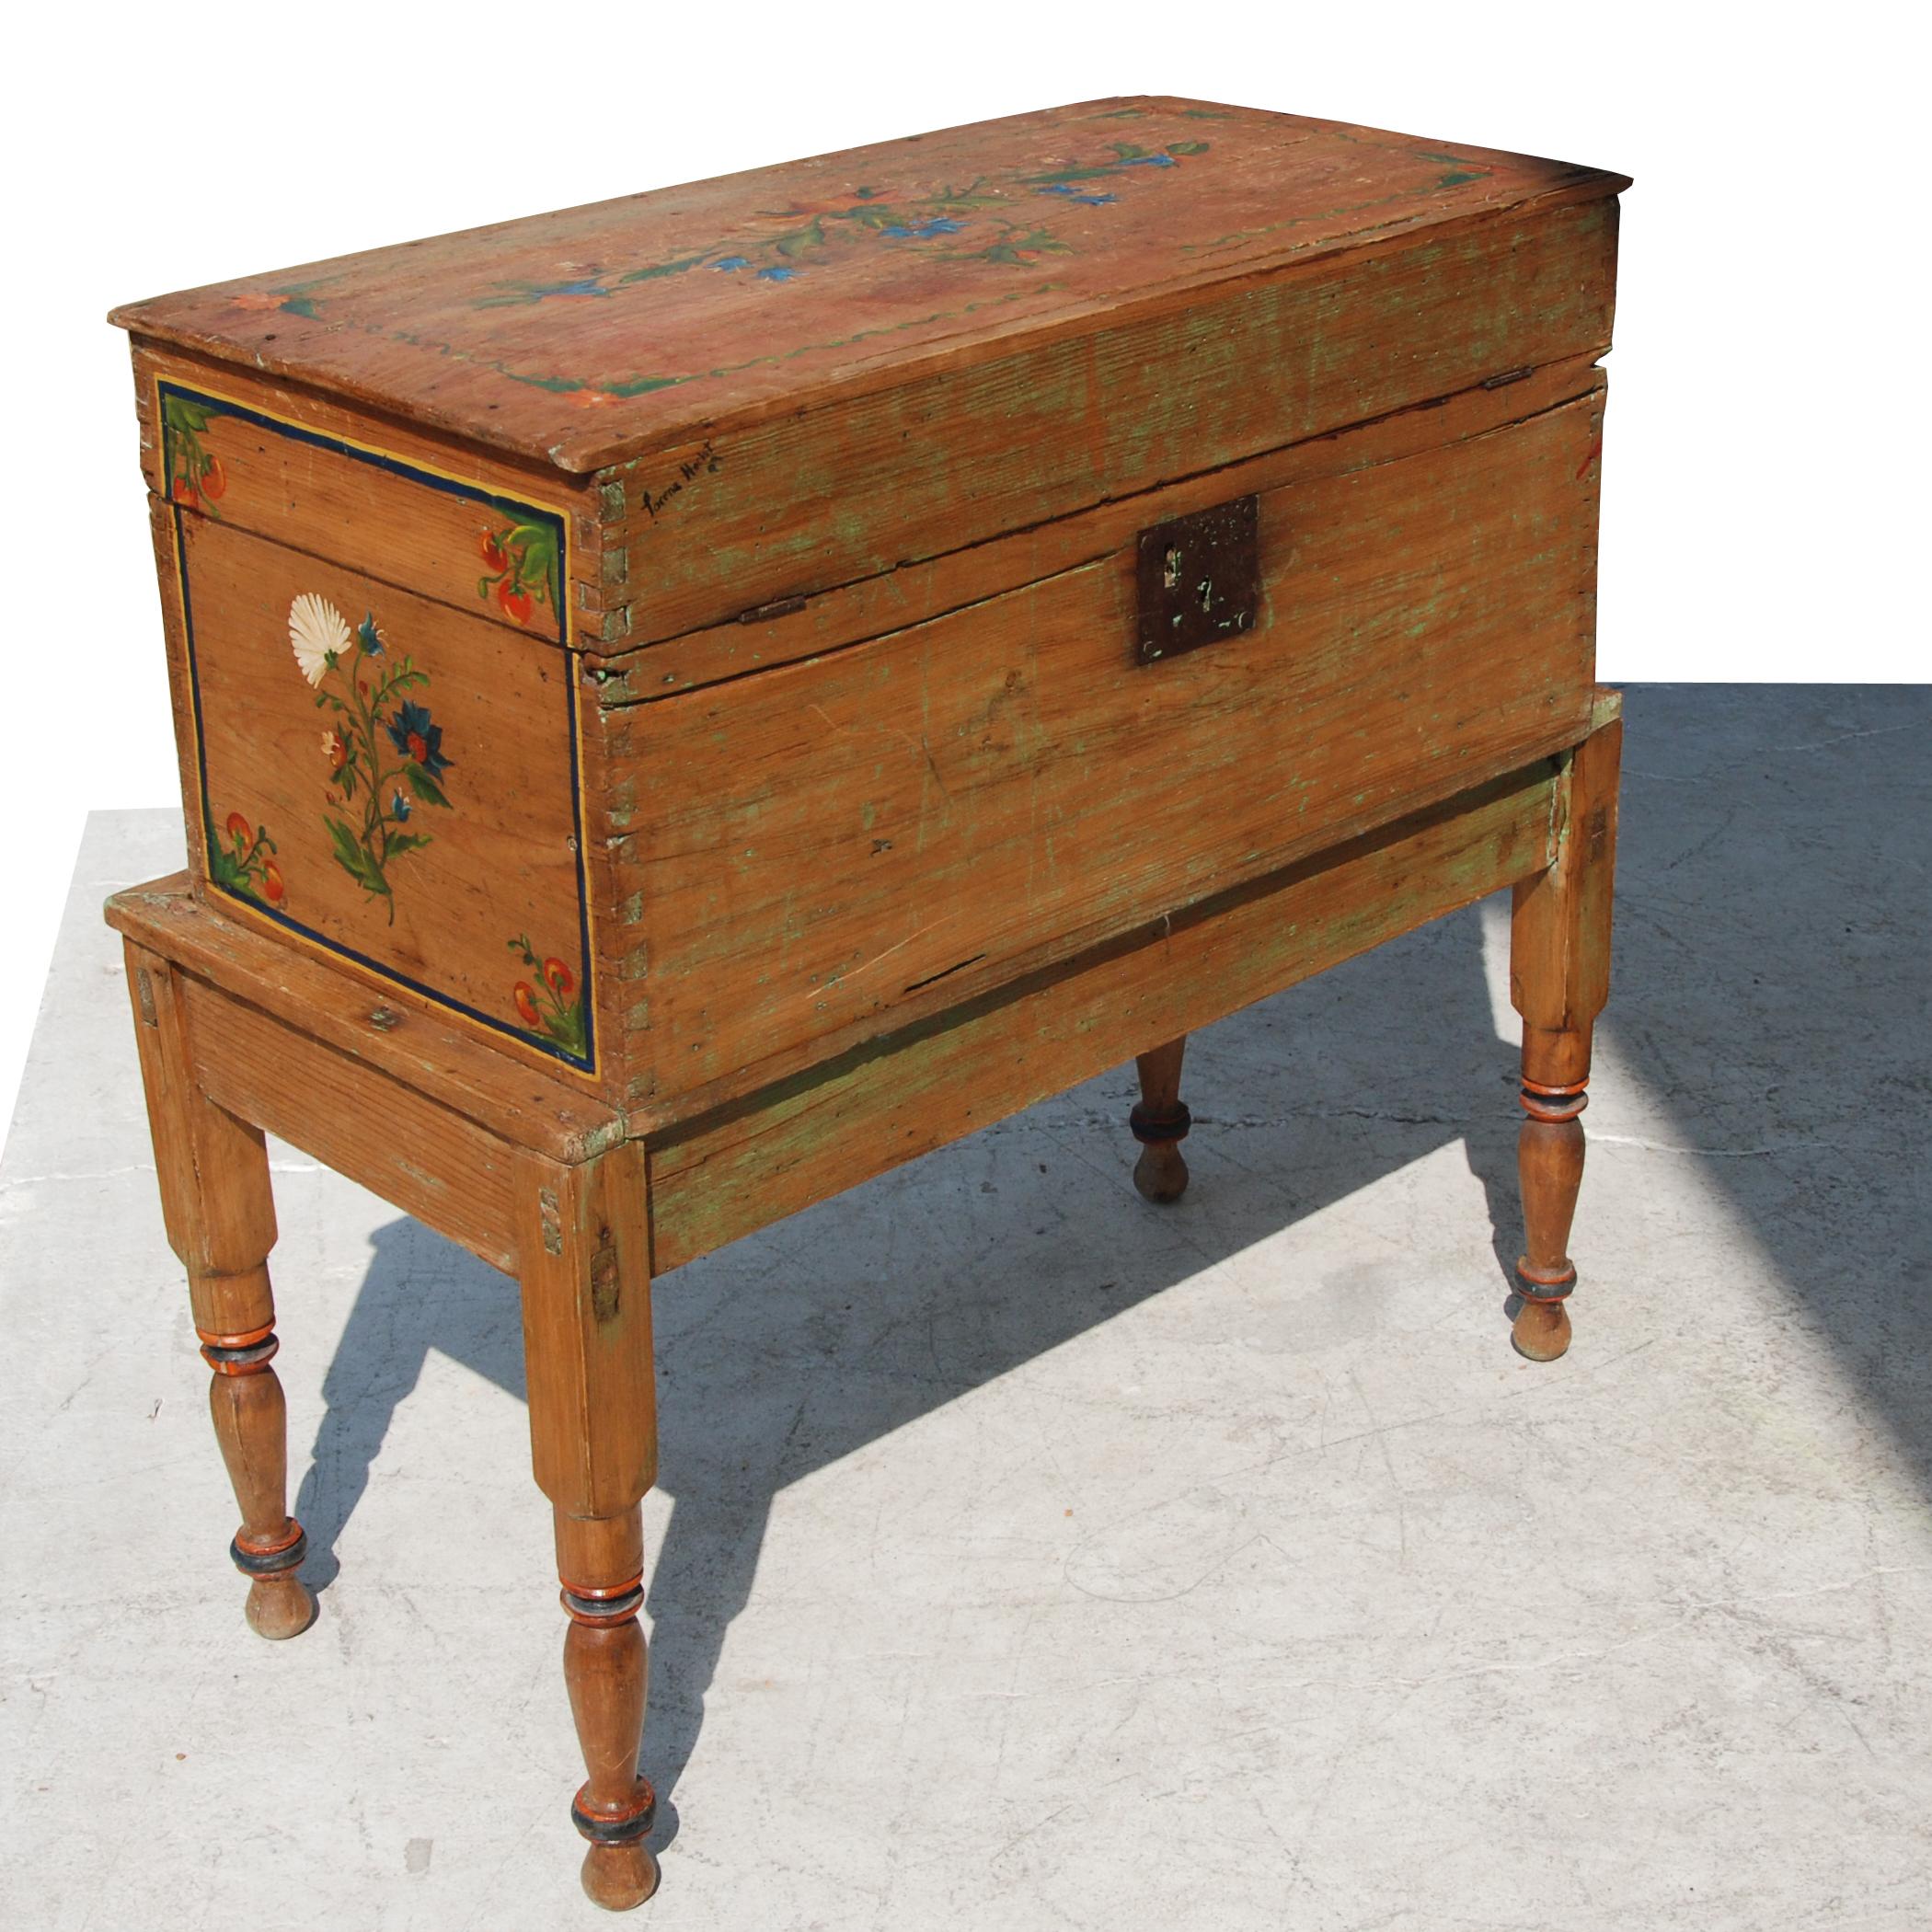 Antique, hand painted Mexican wedding or hope chest on stand

Features beautiful hand painted accents throughout, as well as a locking mechanism. Locking mechanism appears to be a more recent addition to this piece.